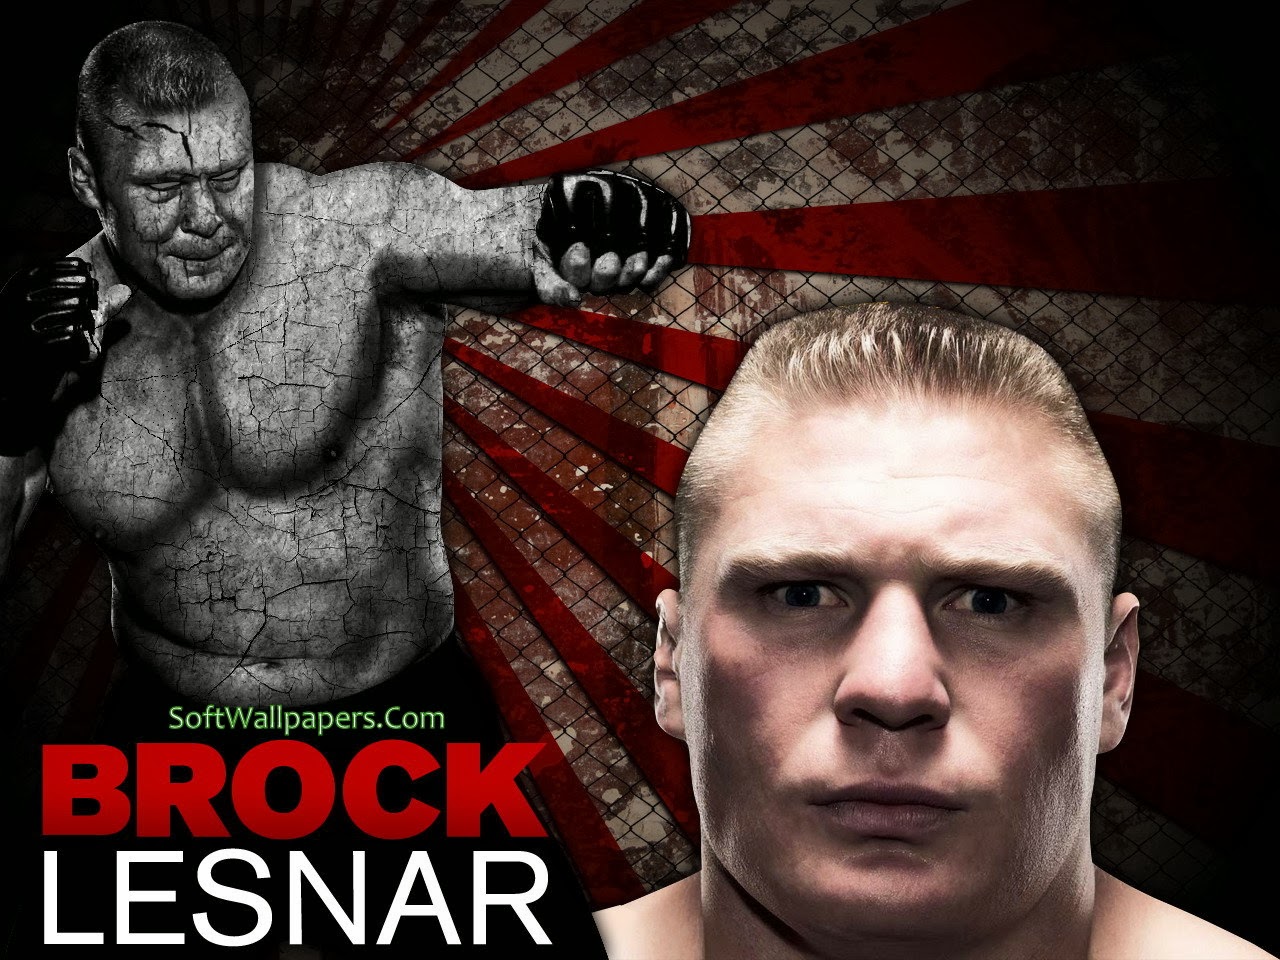 Free download WWE Brock Lesnar HD Wallpapers [1280x960] for your